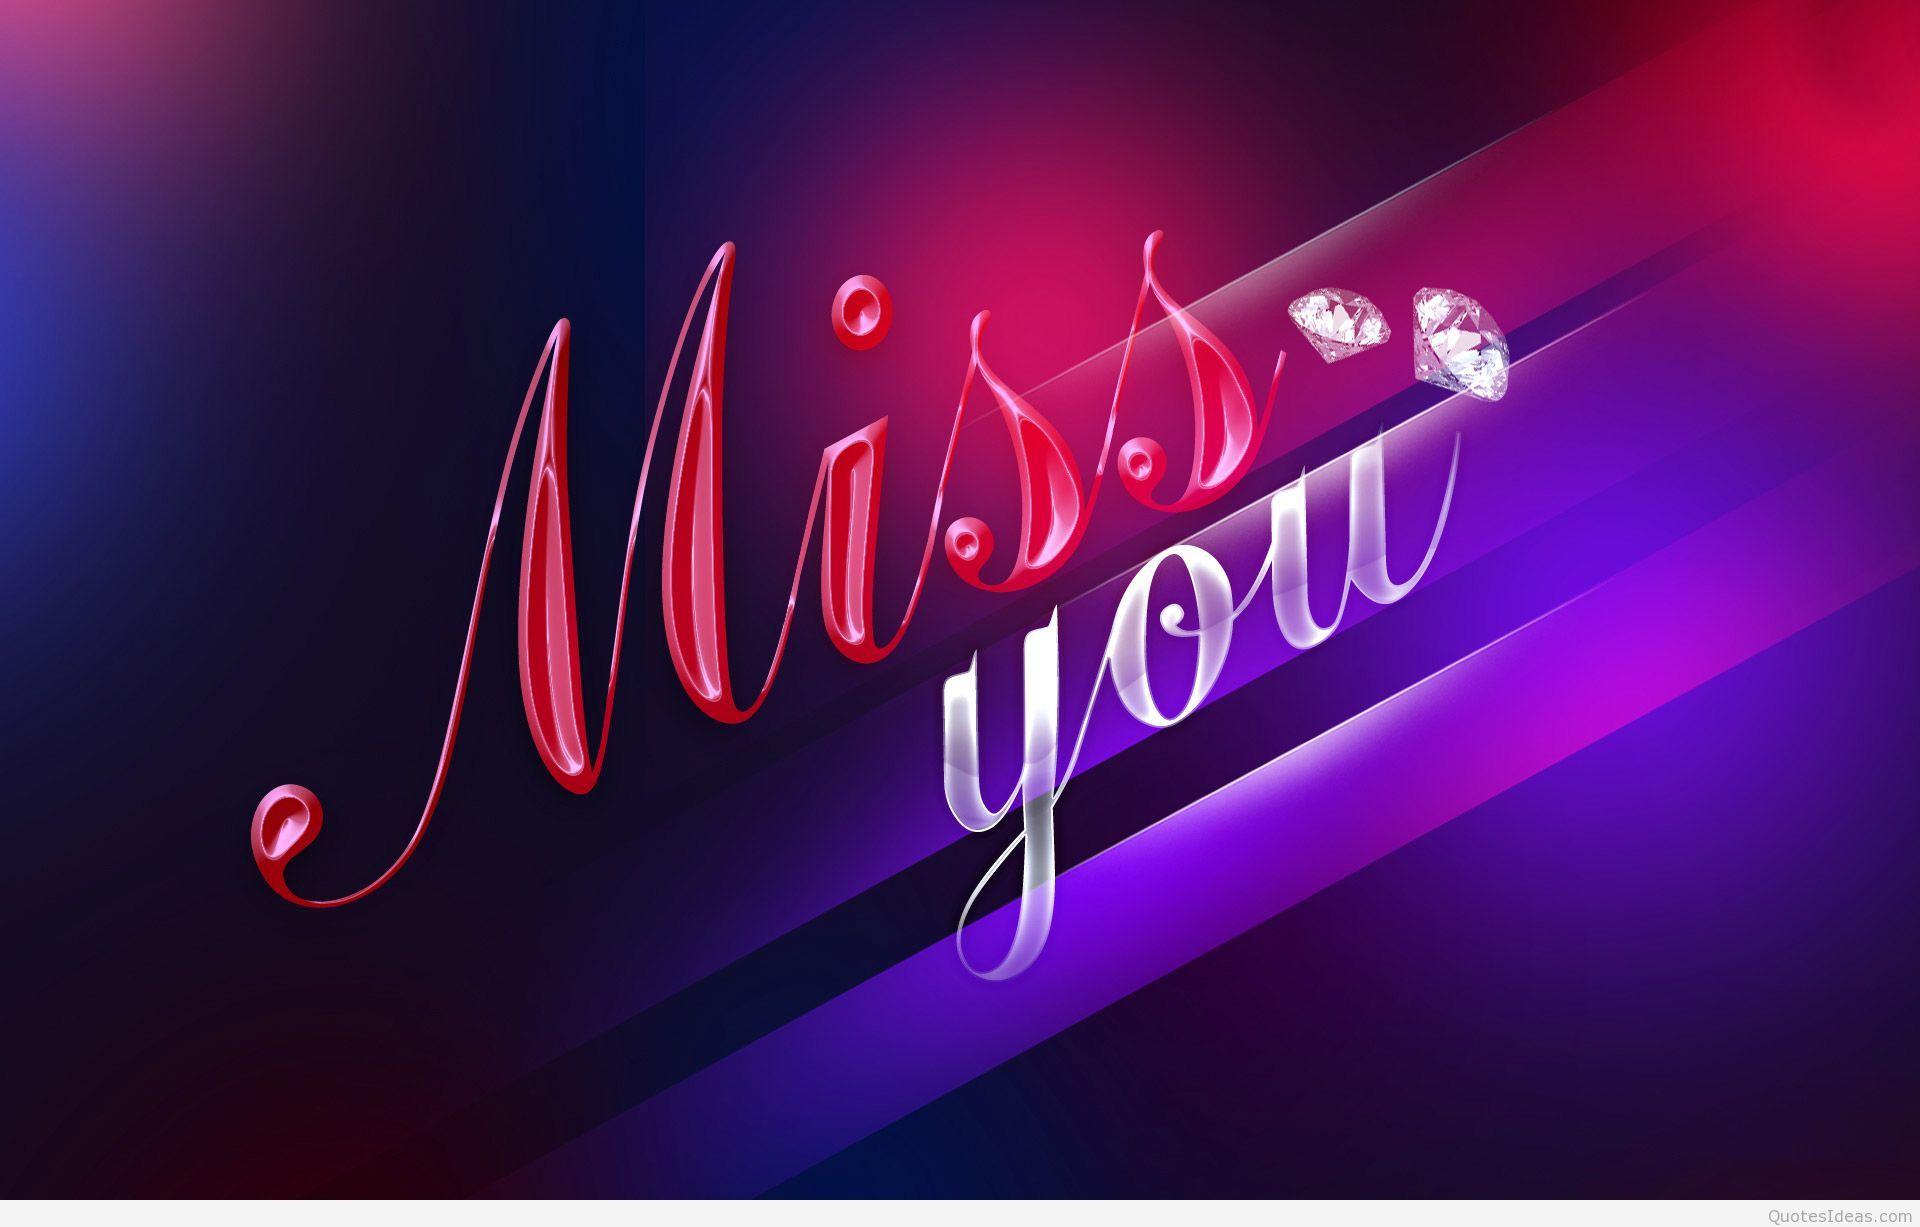 I miss you wallpaper picture 2015 2016